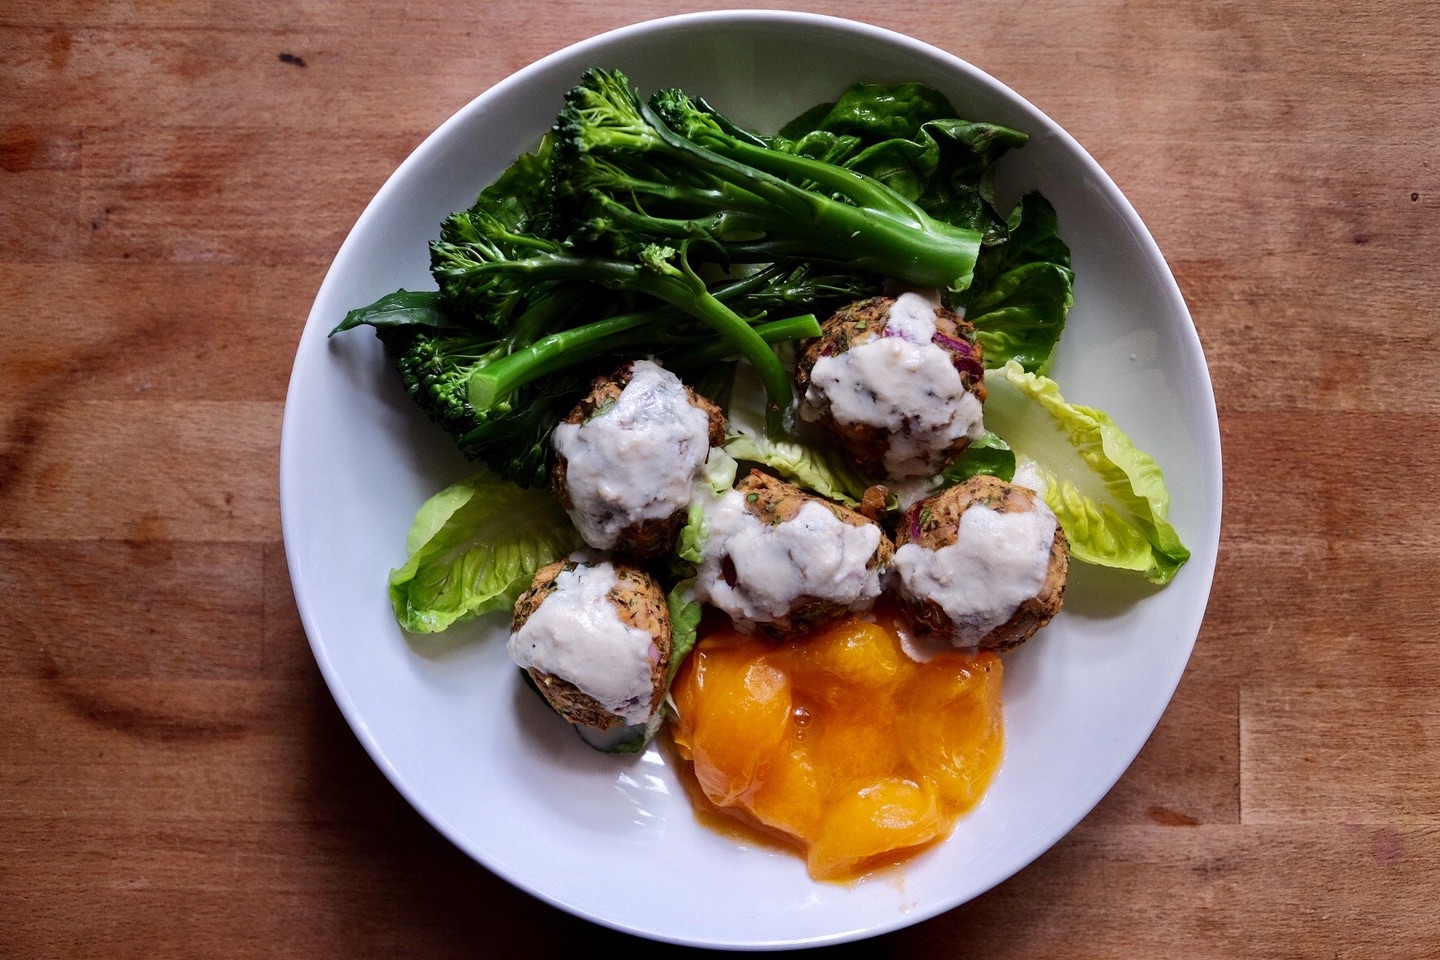 baked blackeye bean balls with steamed brocolli and salad